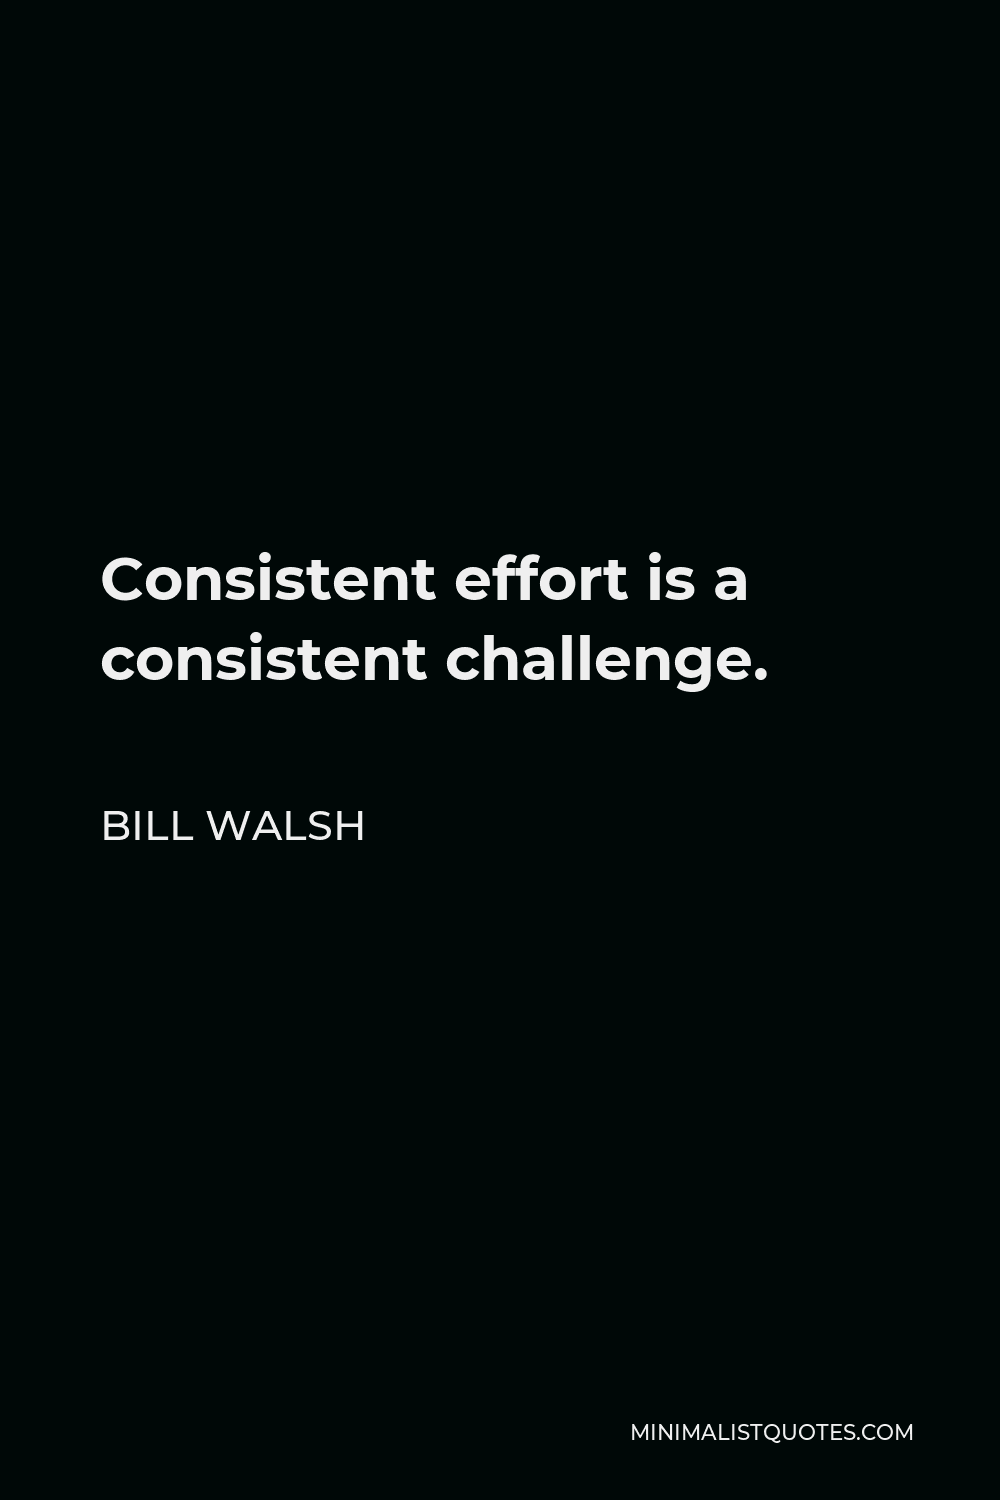 Bill Walsh Quote - Consistent effort is a consistent challenge.